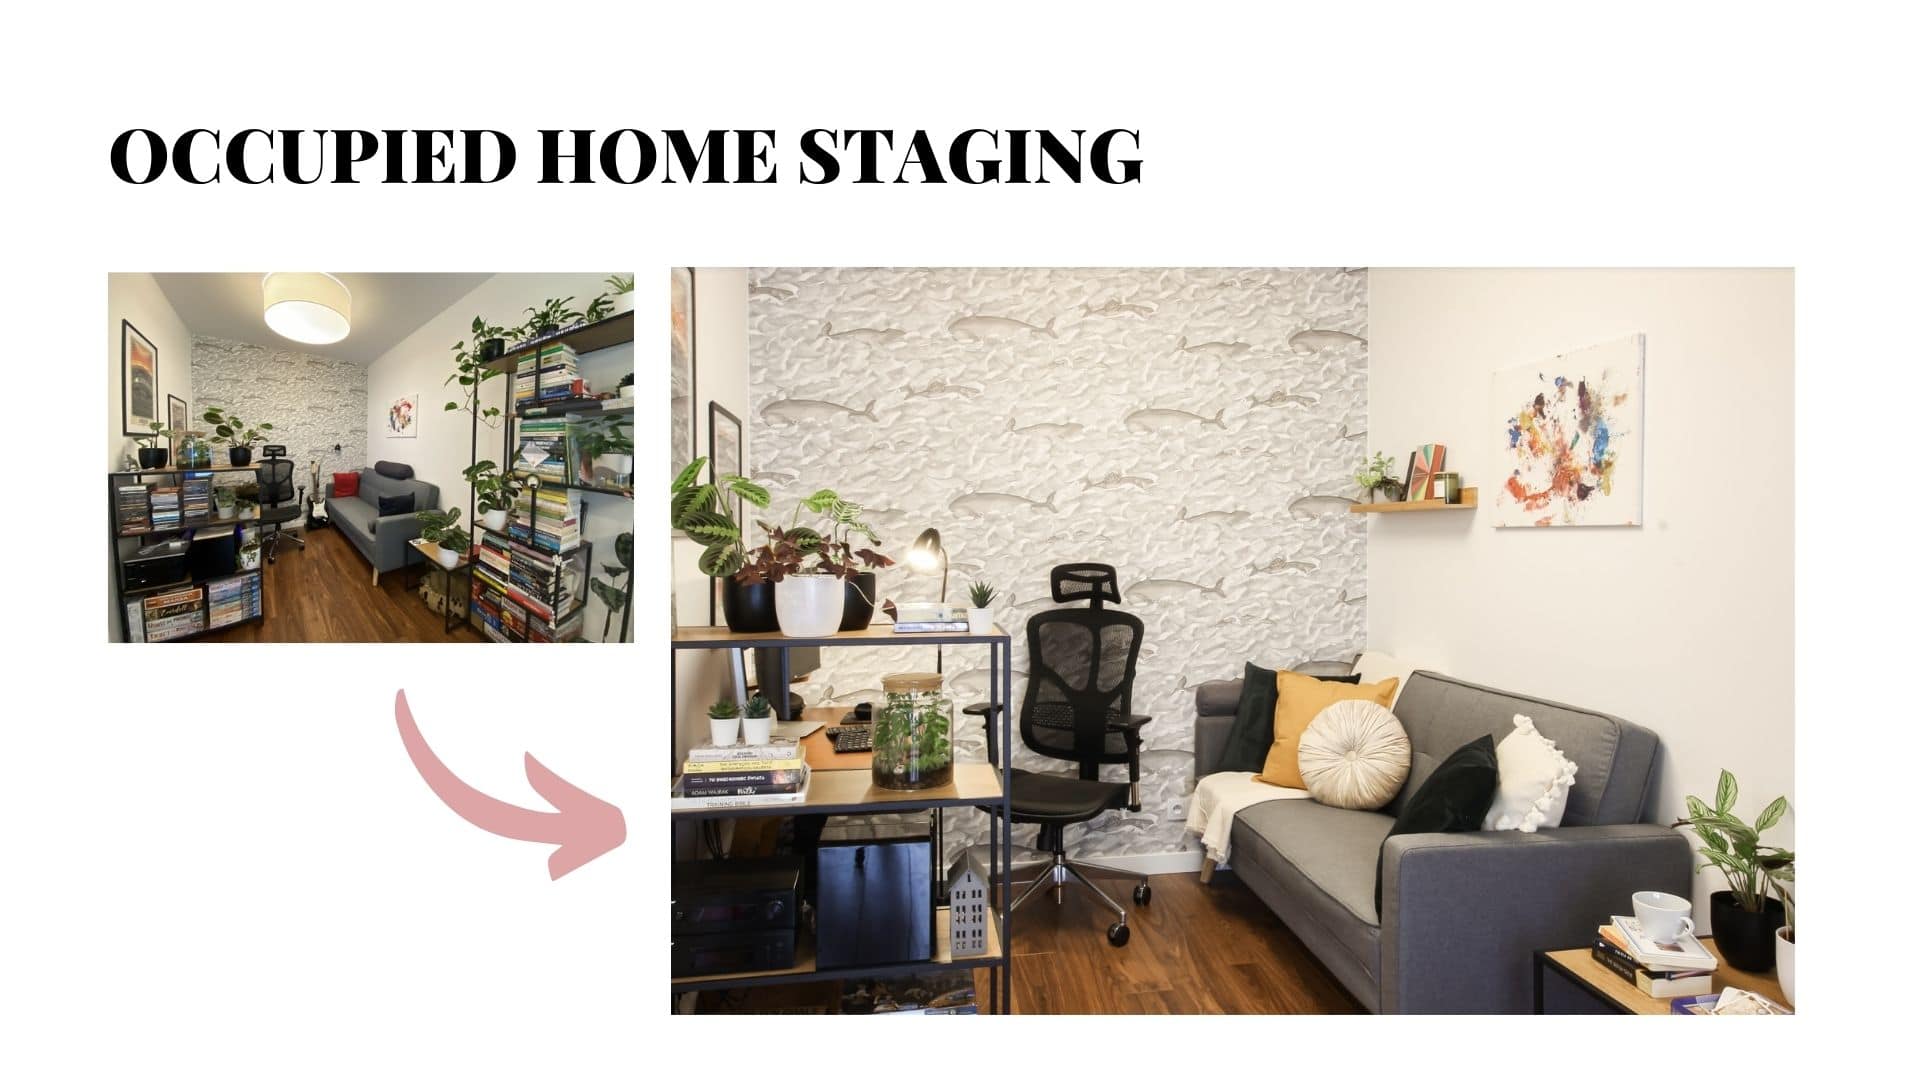 Occupied Home Staging